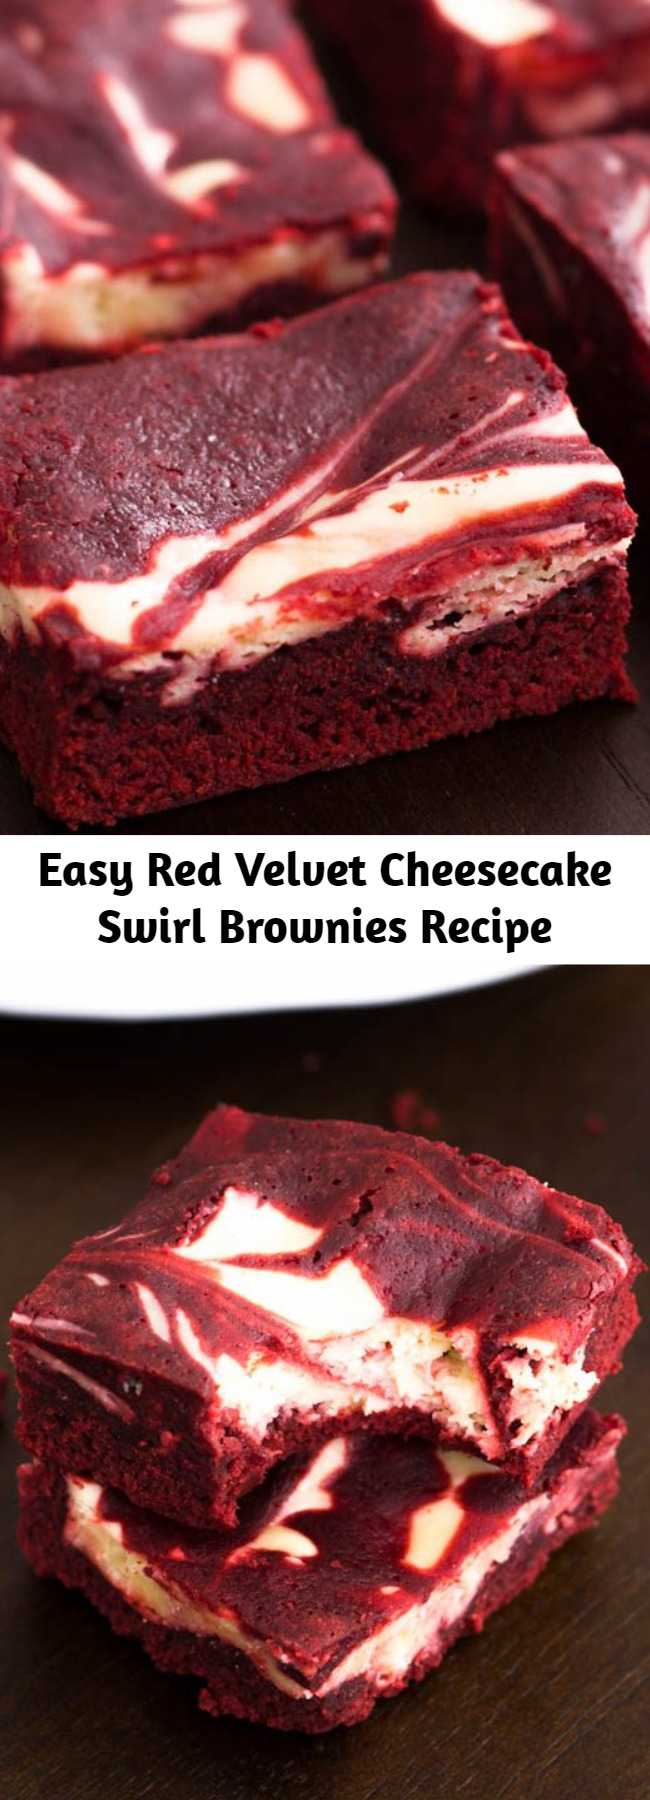 Easy Red Velvet Cheesecake Swirl Brownies Recipe - Chewy, moist, decadent red velvet brownies swirled with cheesecake.